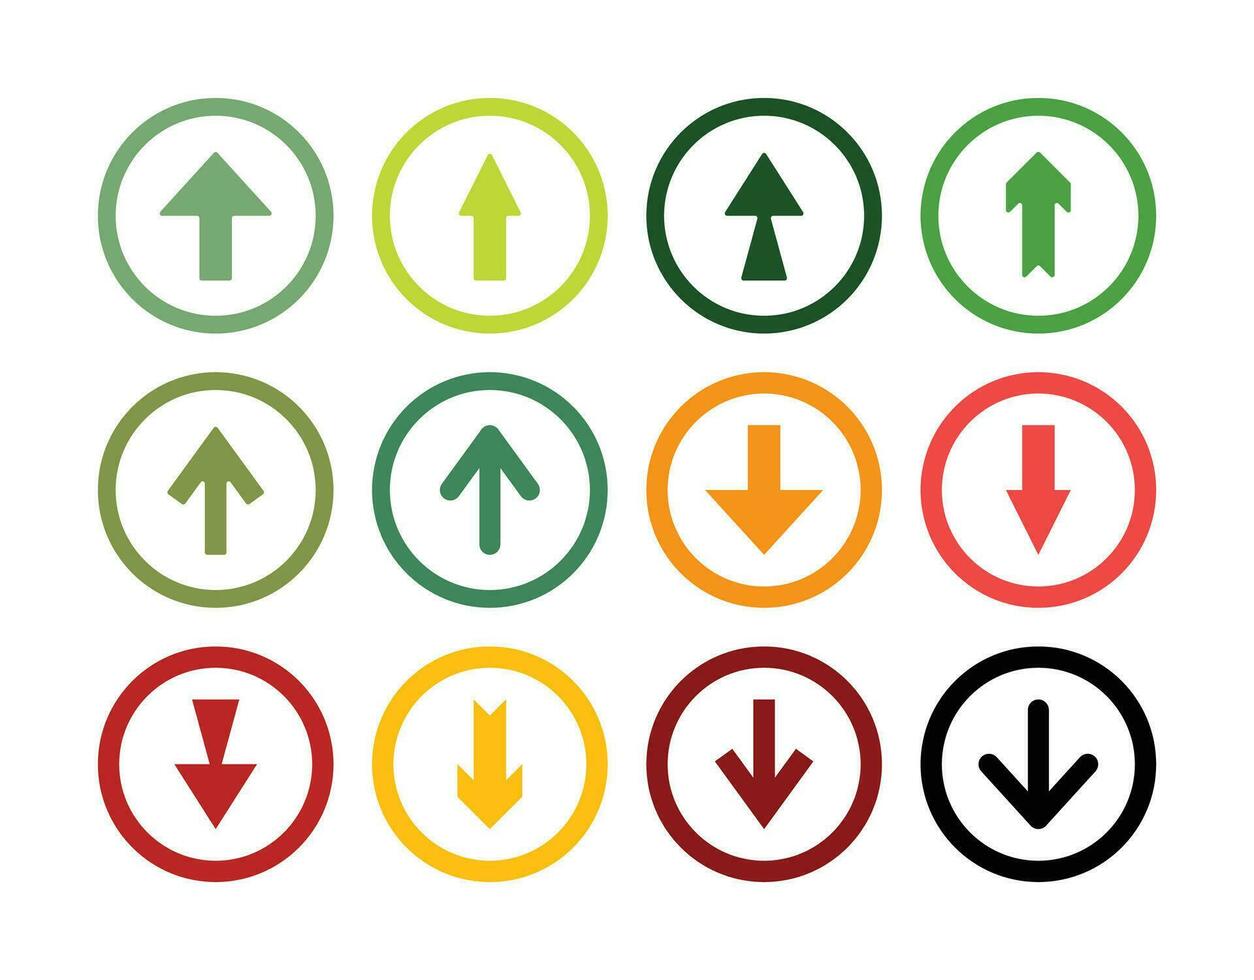 set of arrow icons in a circle, in an up and down direction. Fun colorful flat design, vector for social media, web, apps, flyers.